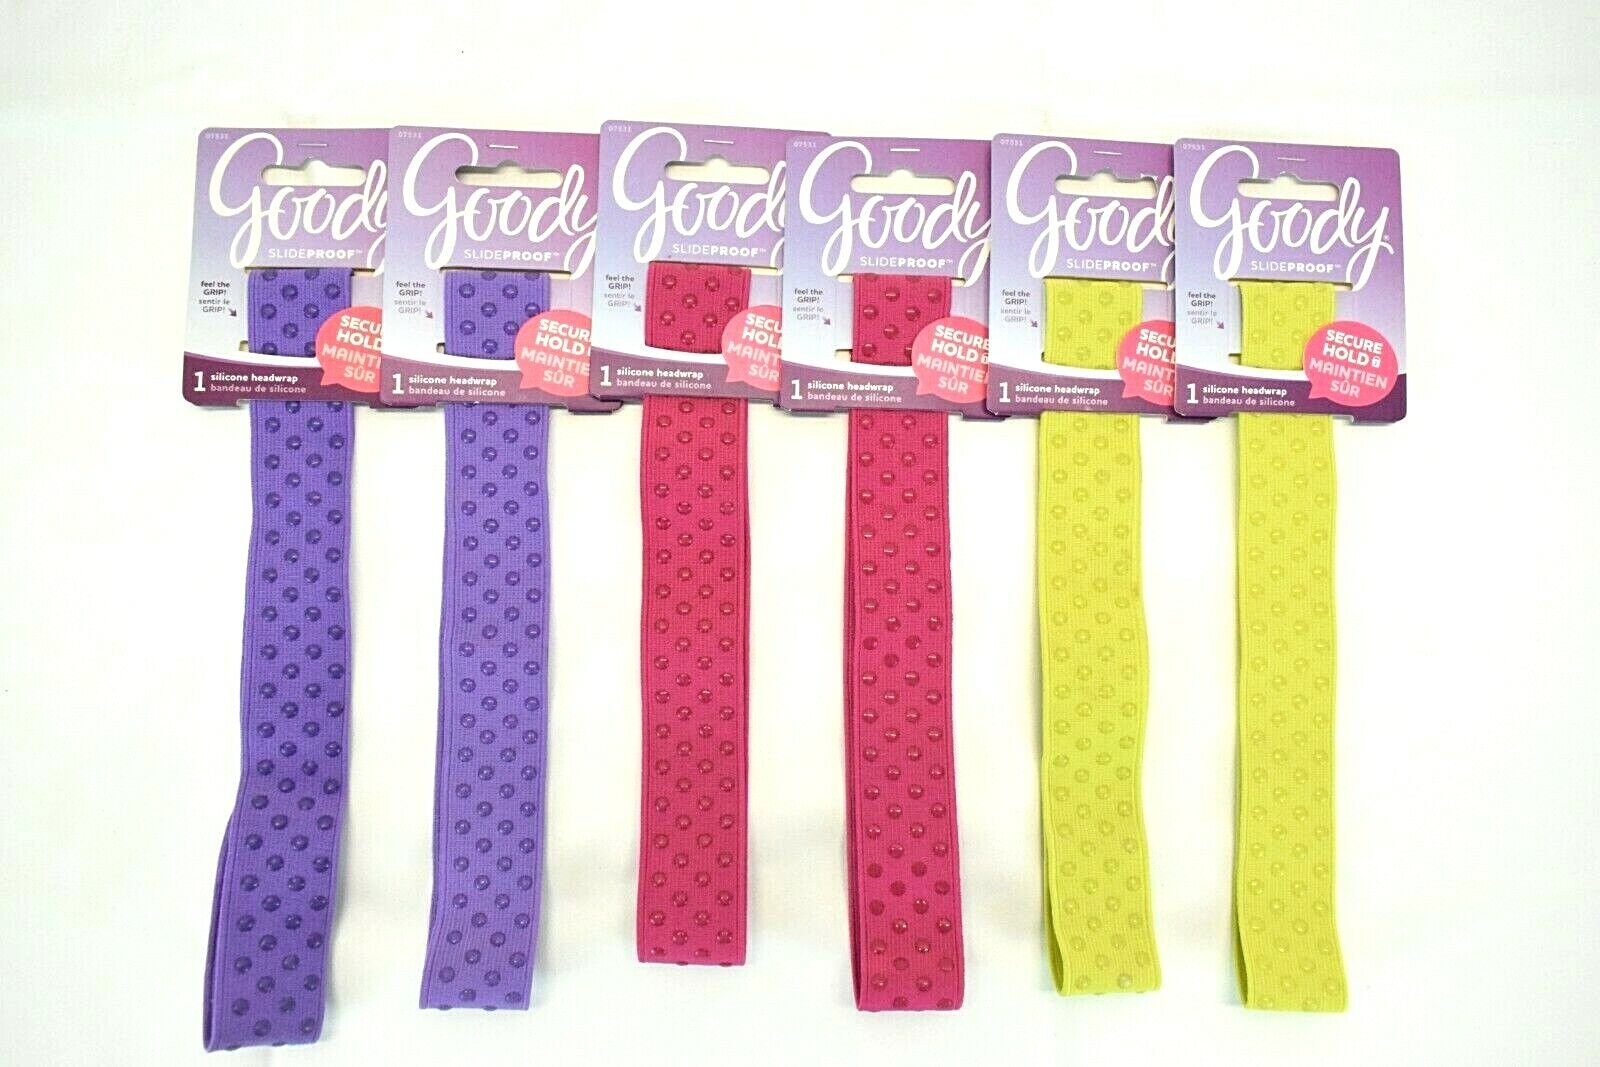 GOODY SLIDEPROOF WIDE DOTS HEADWRAP ASSORT COLORS UPC:041457075319 PACK:72/3 - Click Image to Close